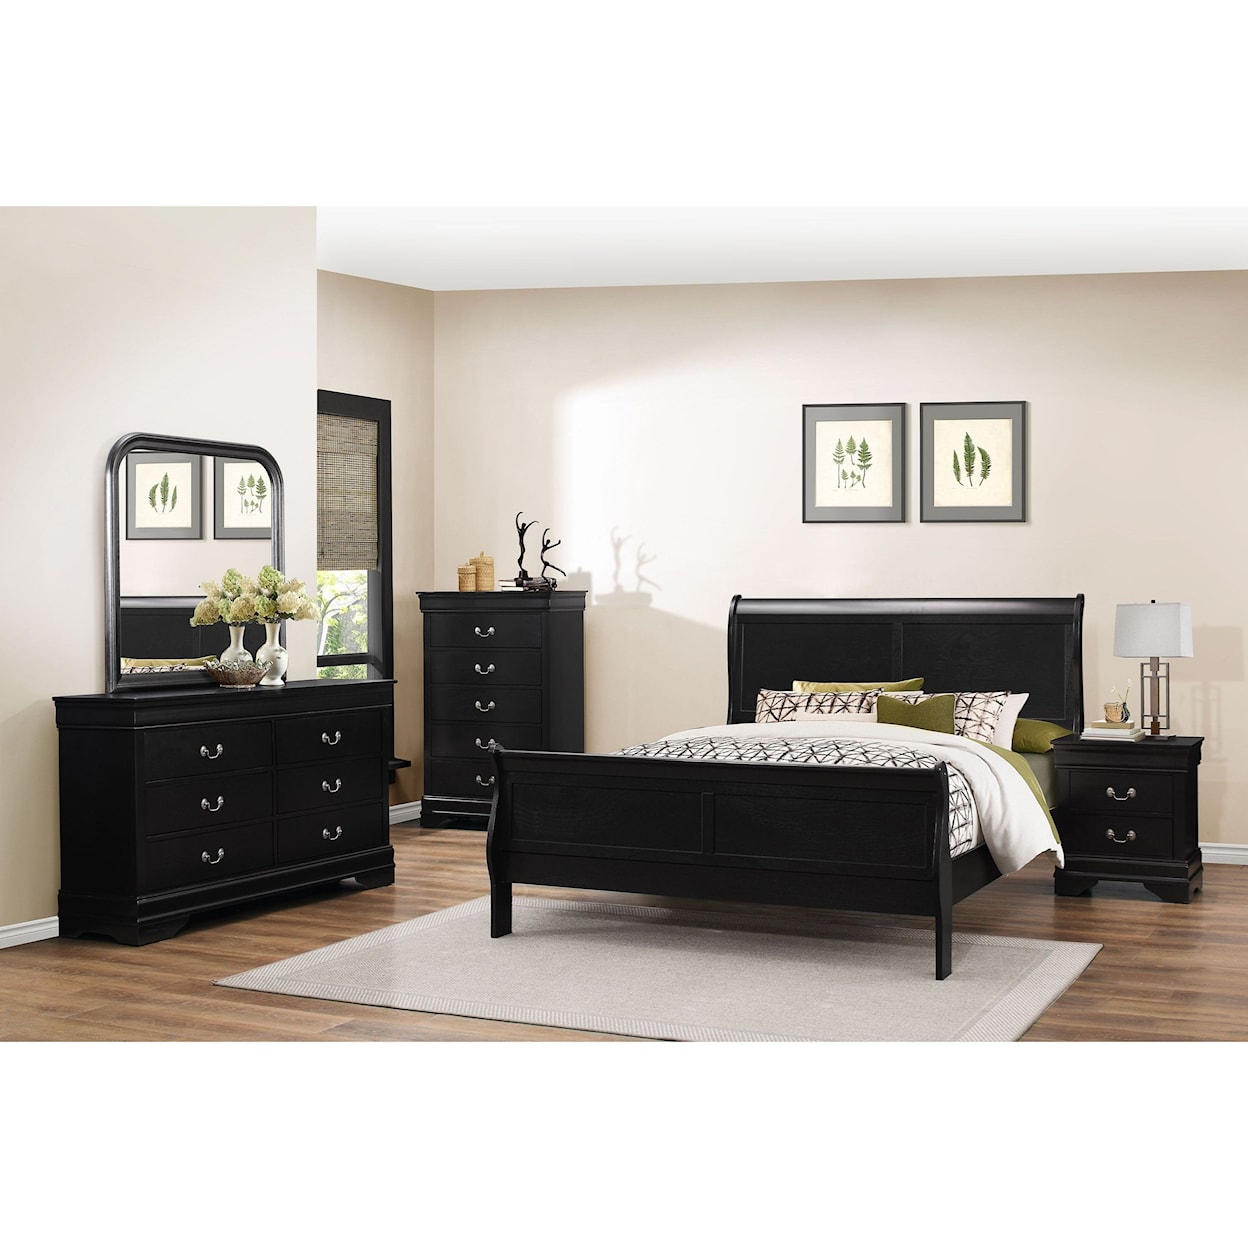 Lifestyle 4937 Queen Sleigh Bed